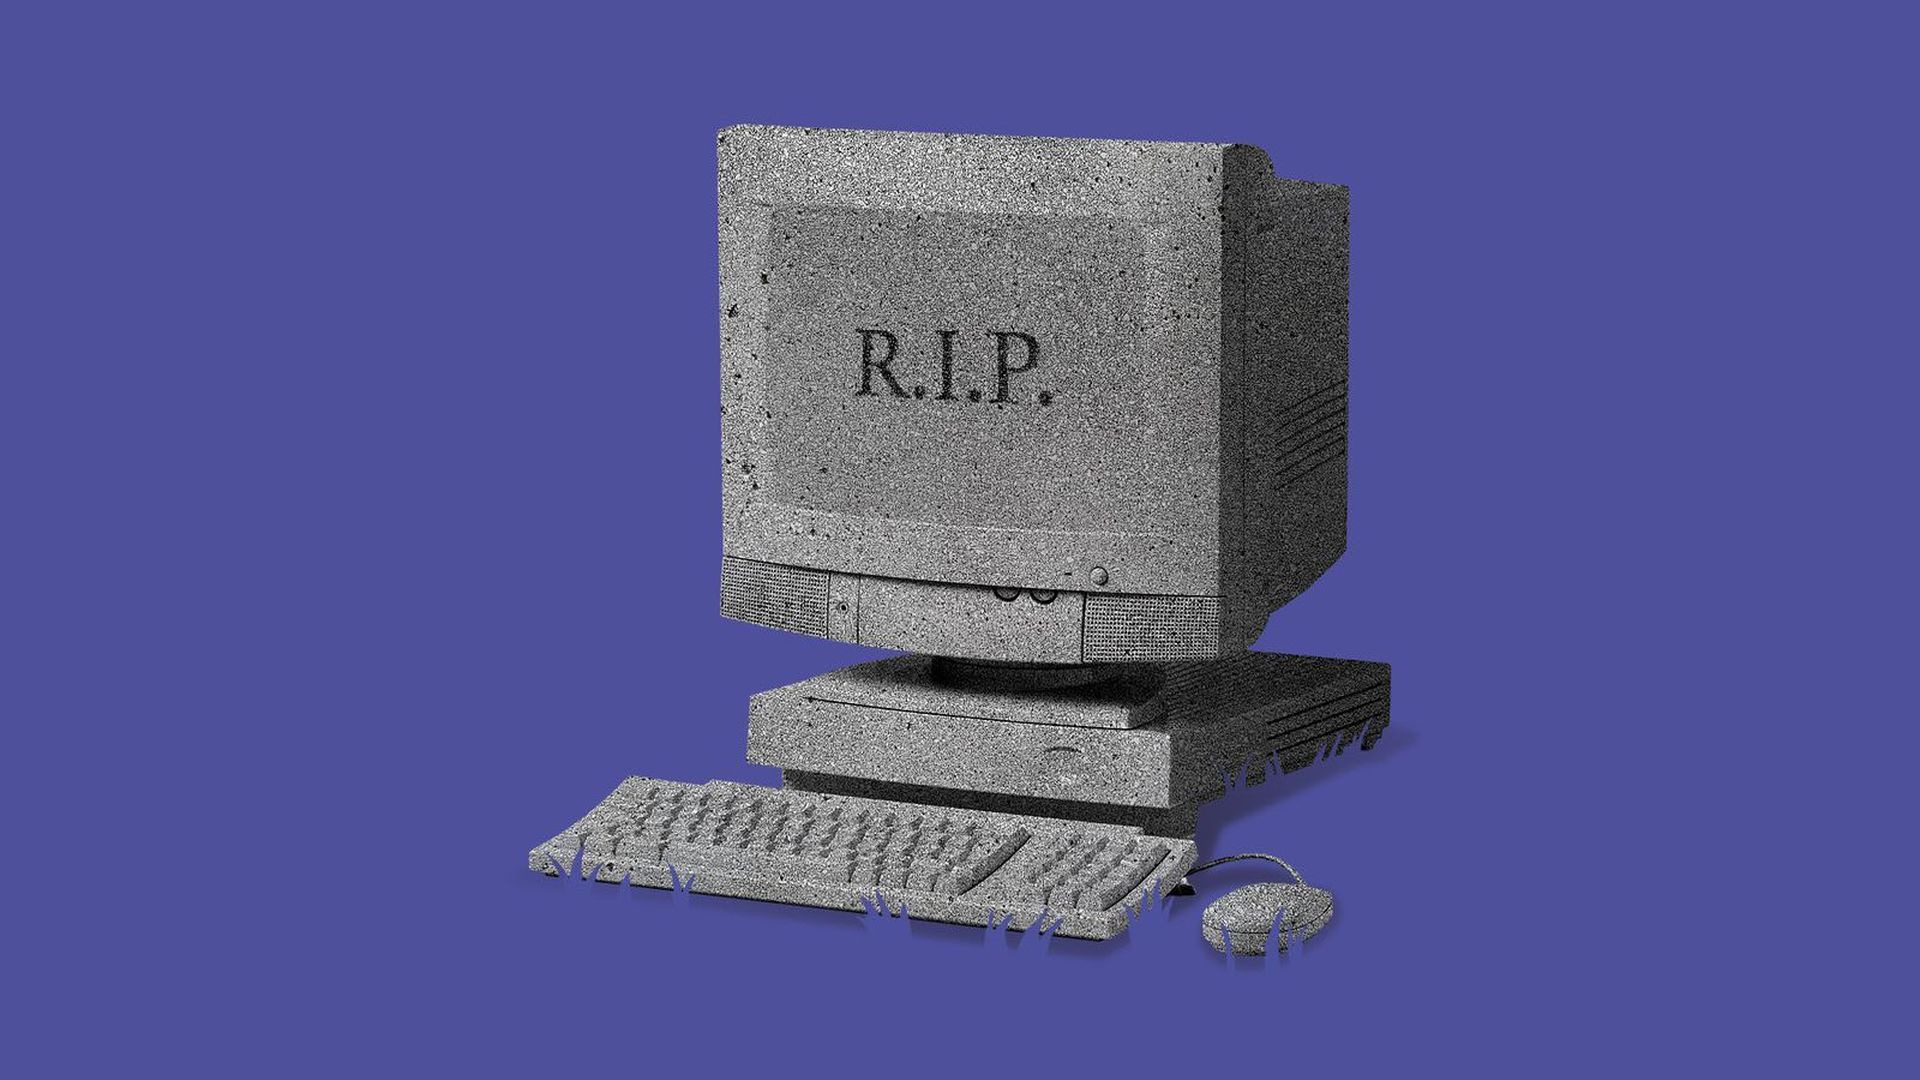 Illustration of an old-fashioned personal computer made of marble with a screen reading "R.I.P."